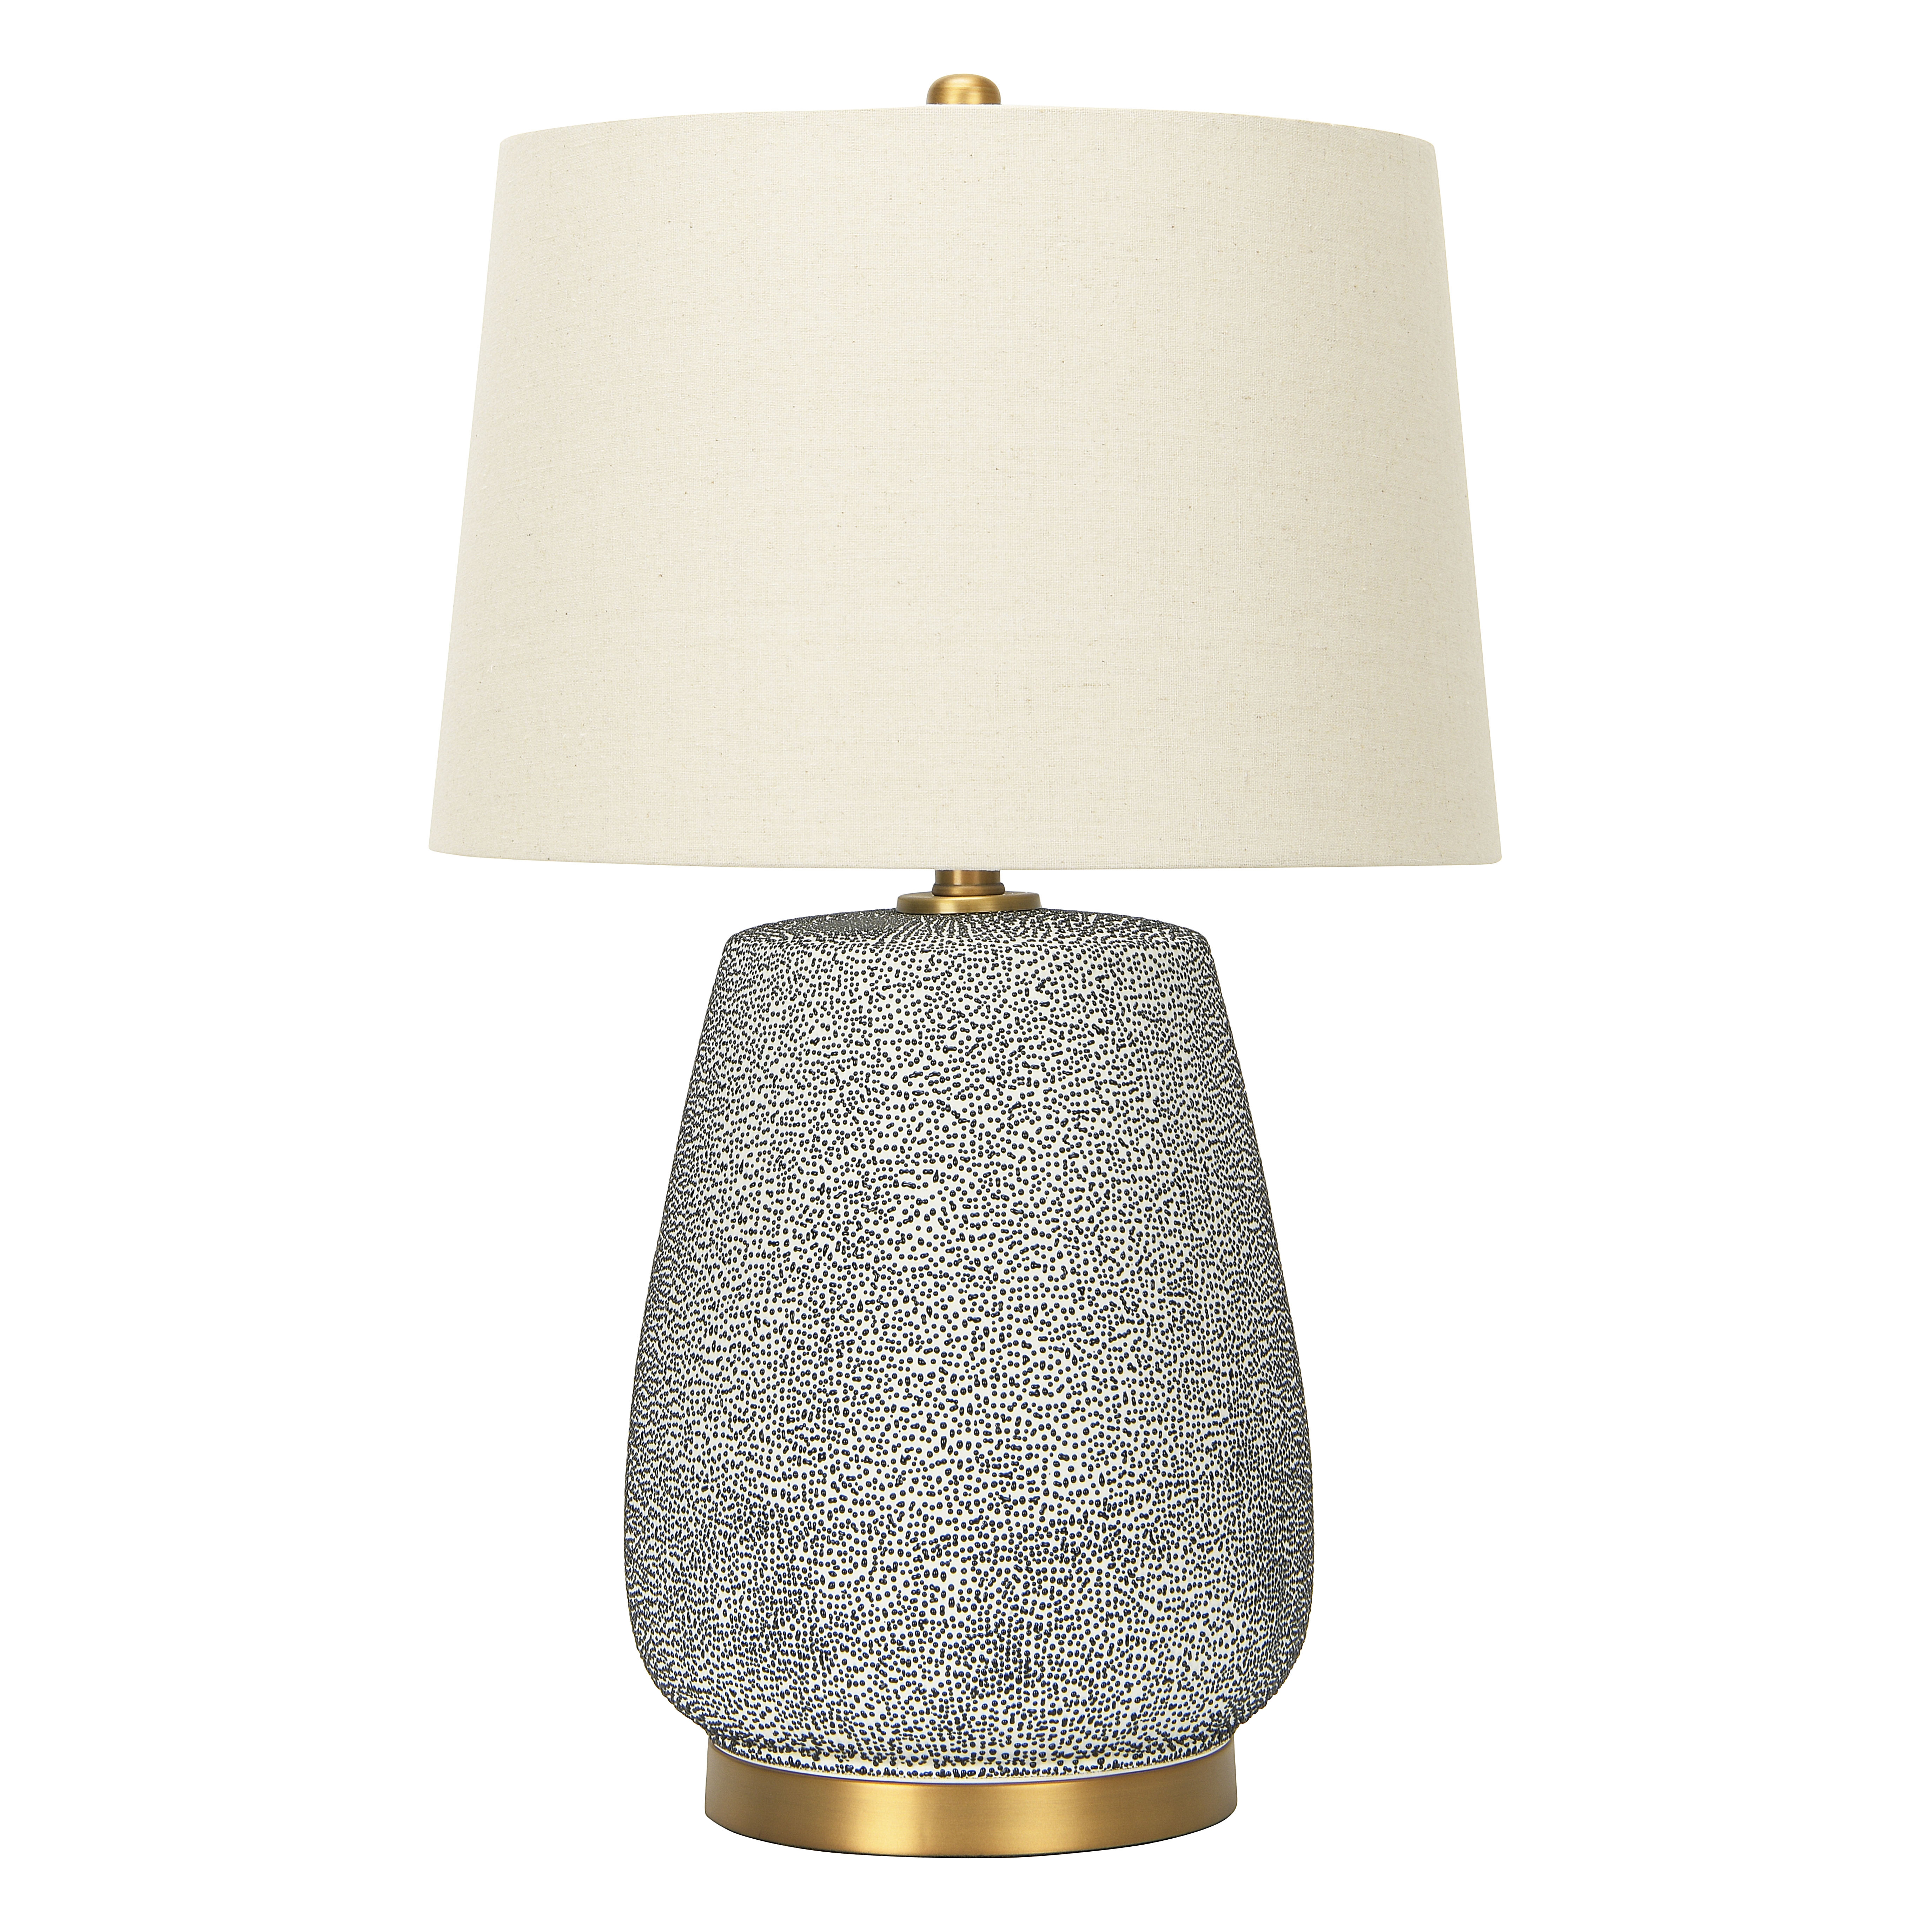 Textured Blue Glaze Ceramic Table Lamp with Natural Linen Shade - Image 0